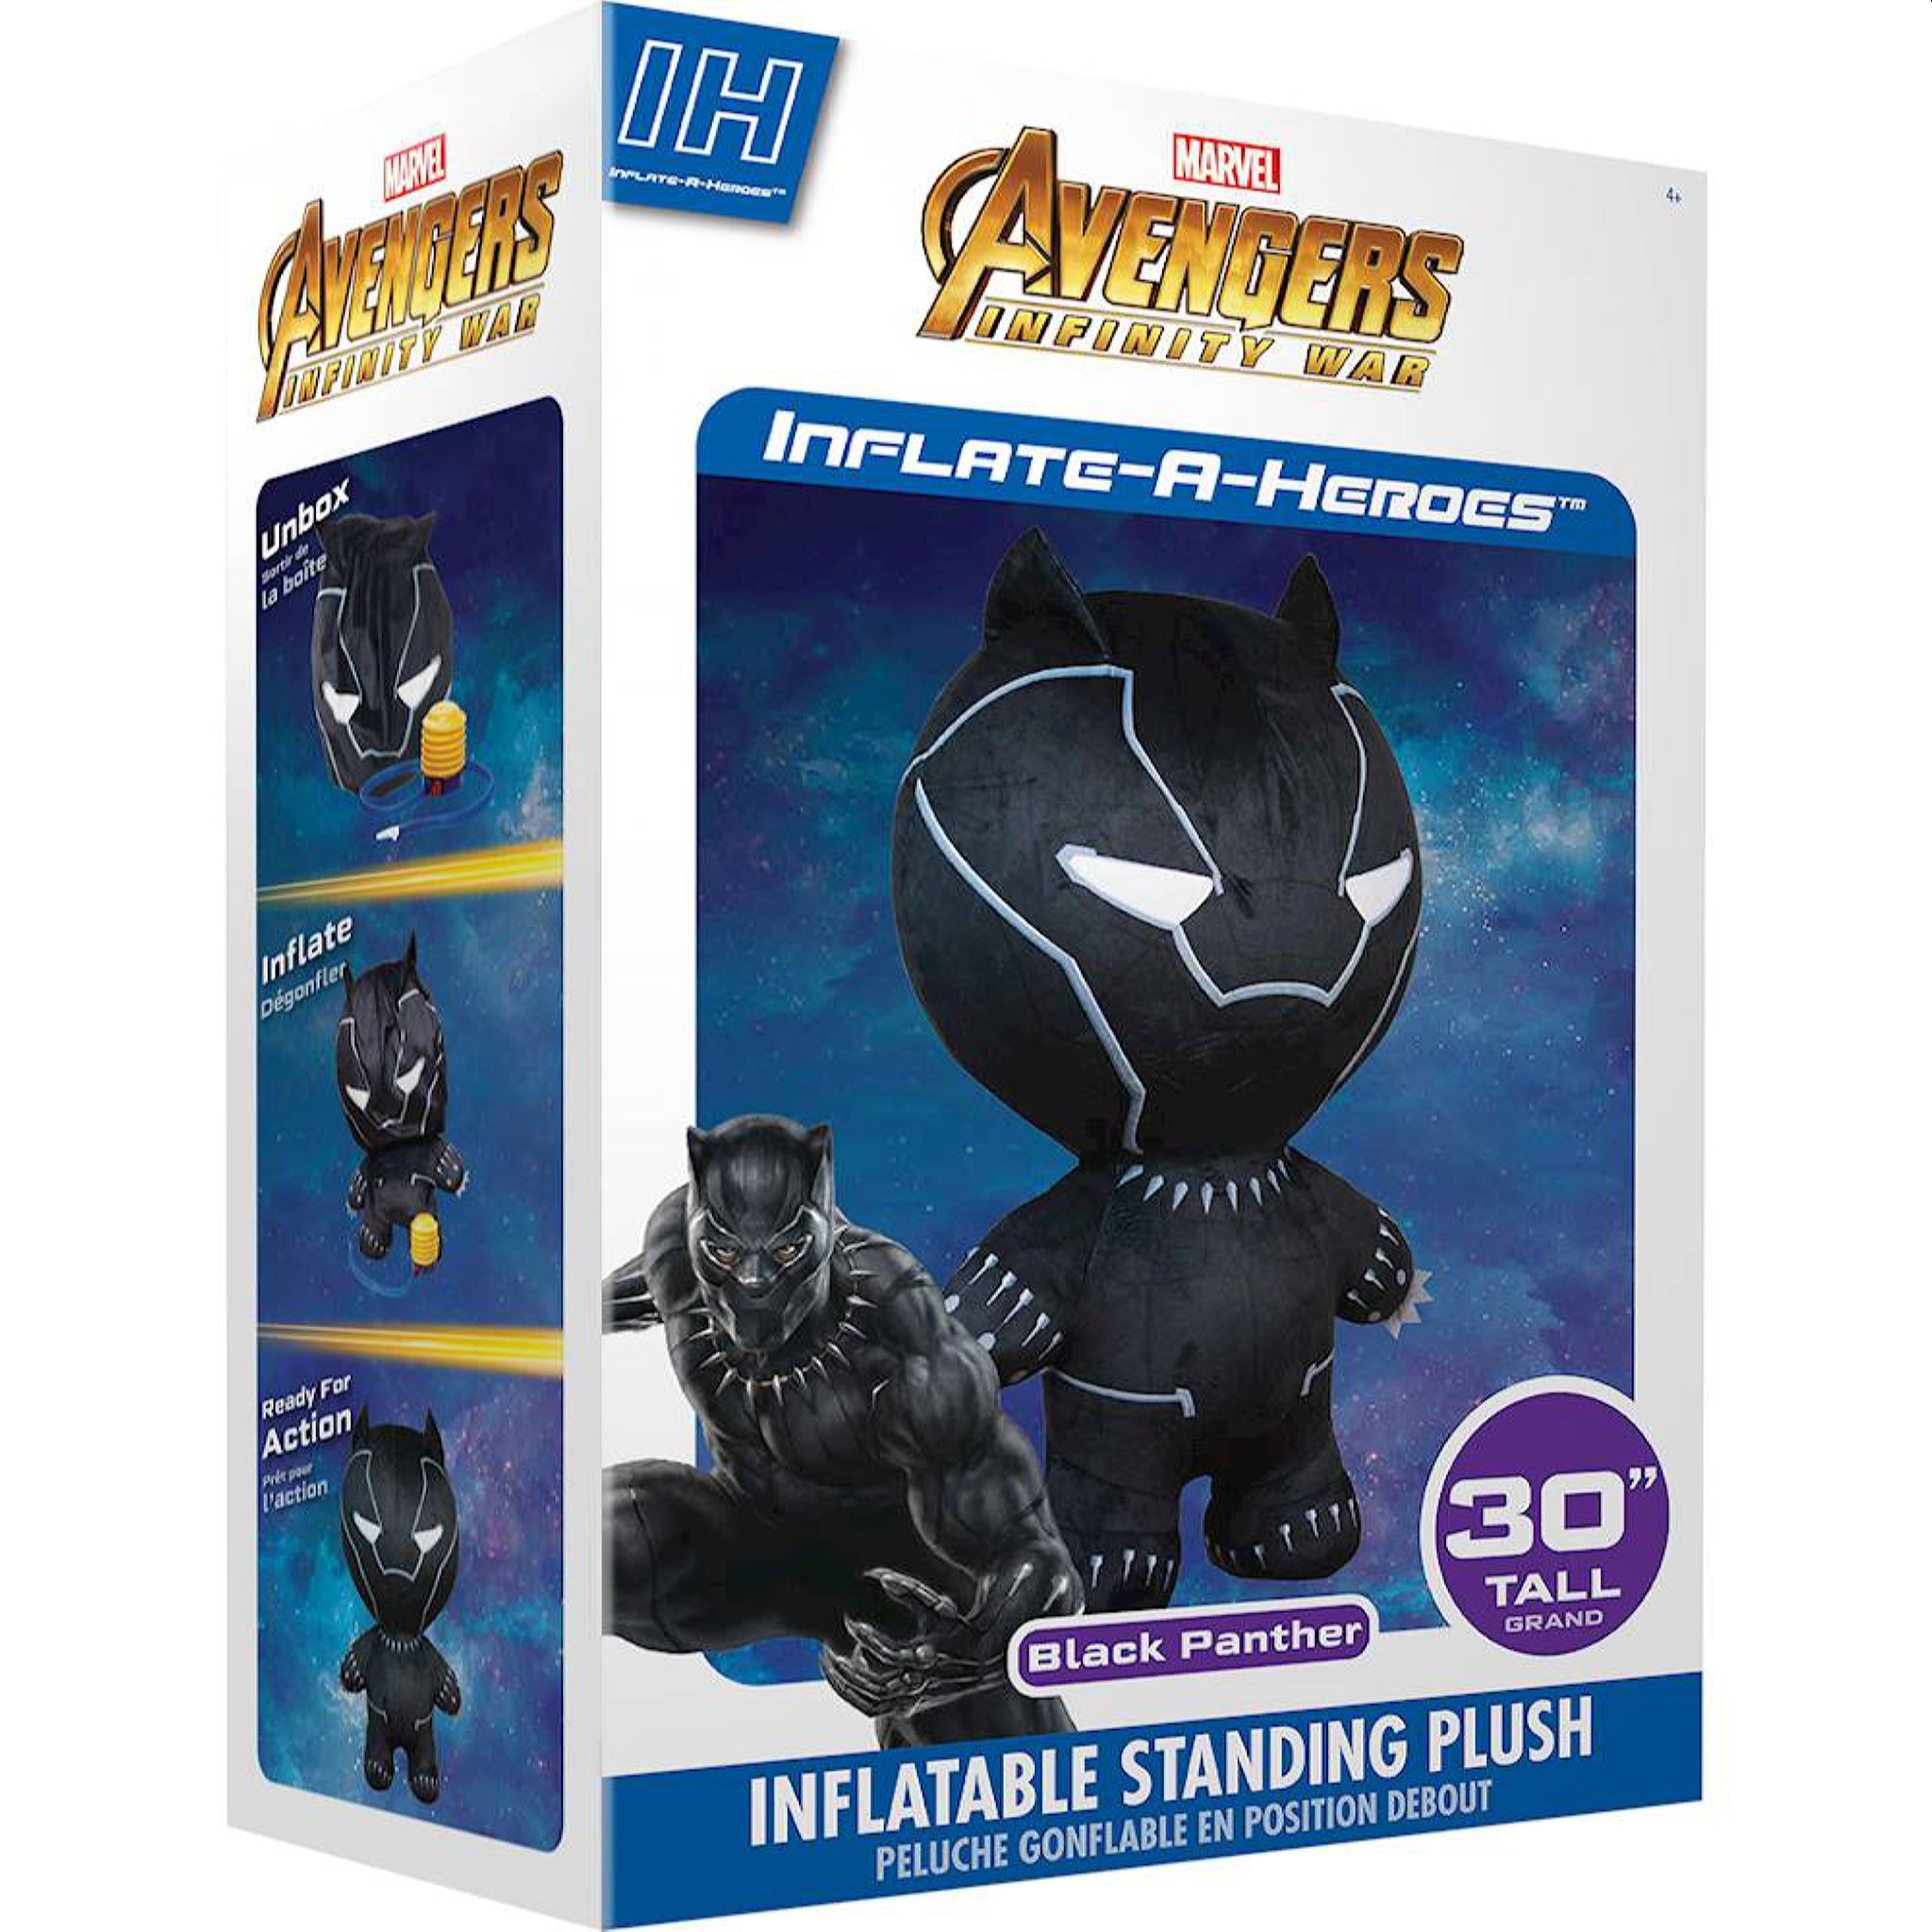 Marvel Infinity War Black Panther Series 1 Inflatable Standing Plush